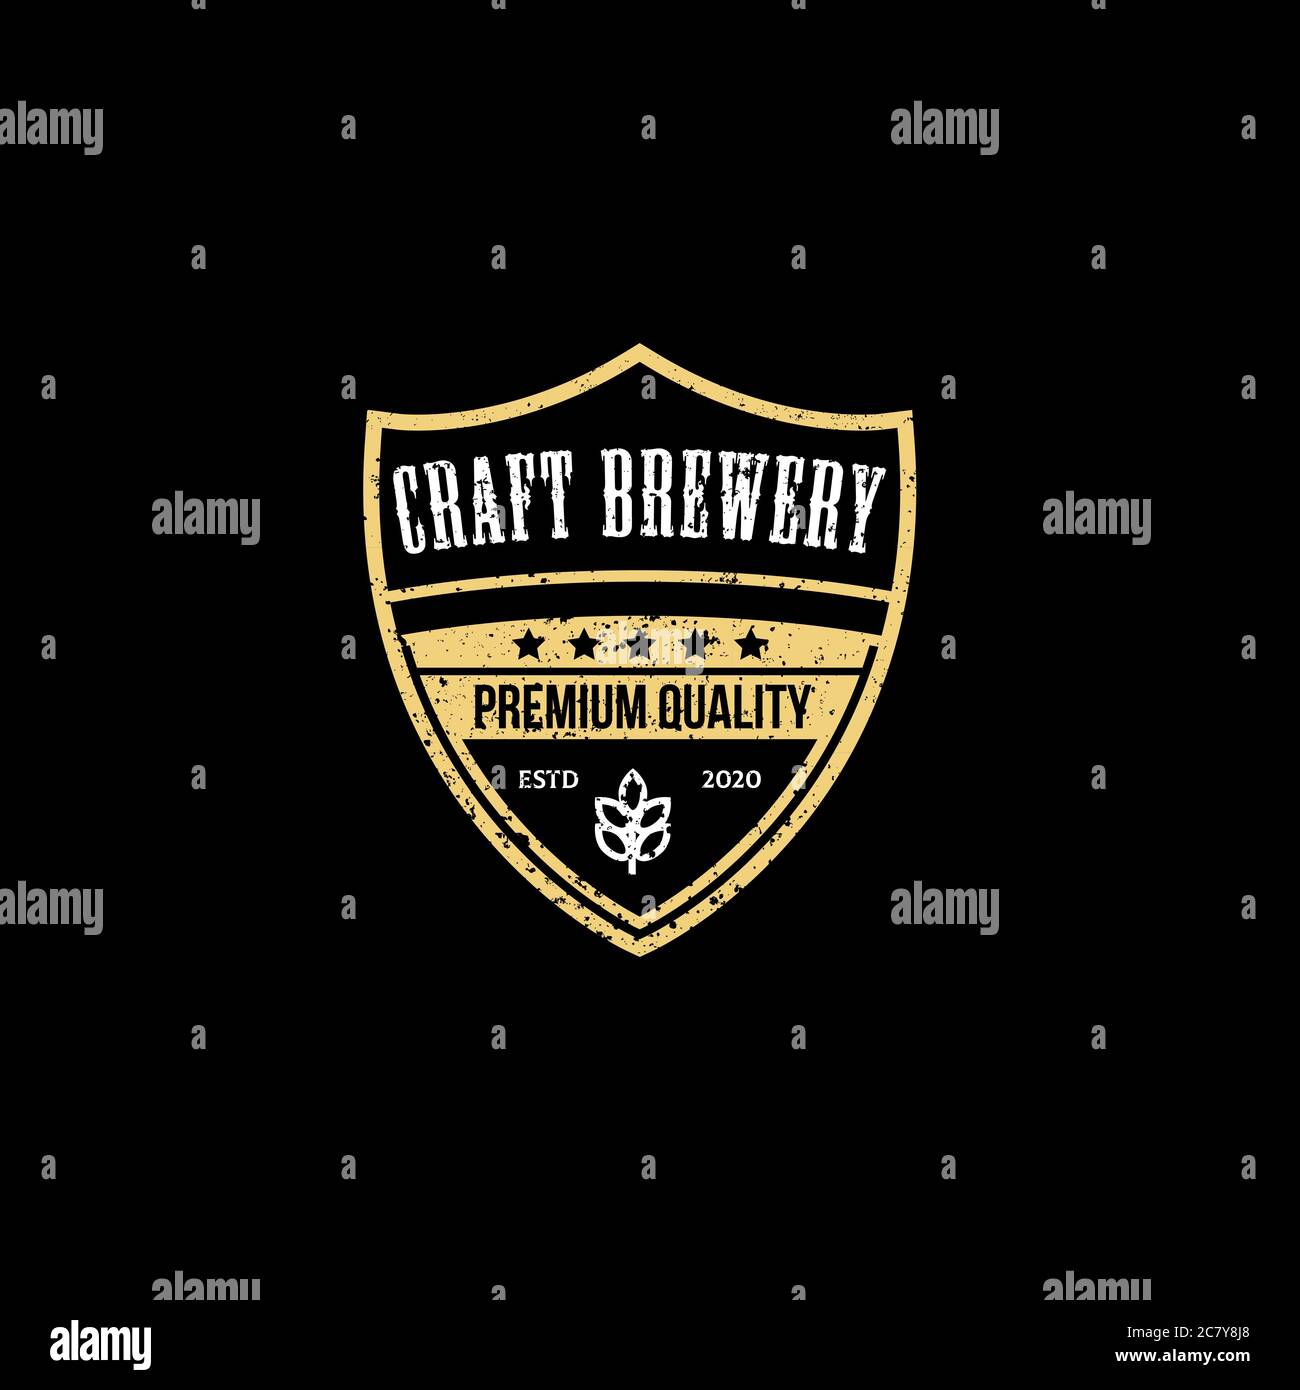 Vintage Shield craft brewery logo design vector, best for brew house, bar, pub, brewing company branding and identity Stock Vector